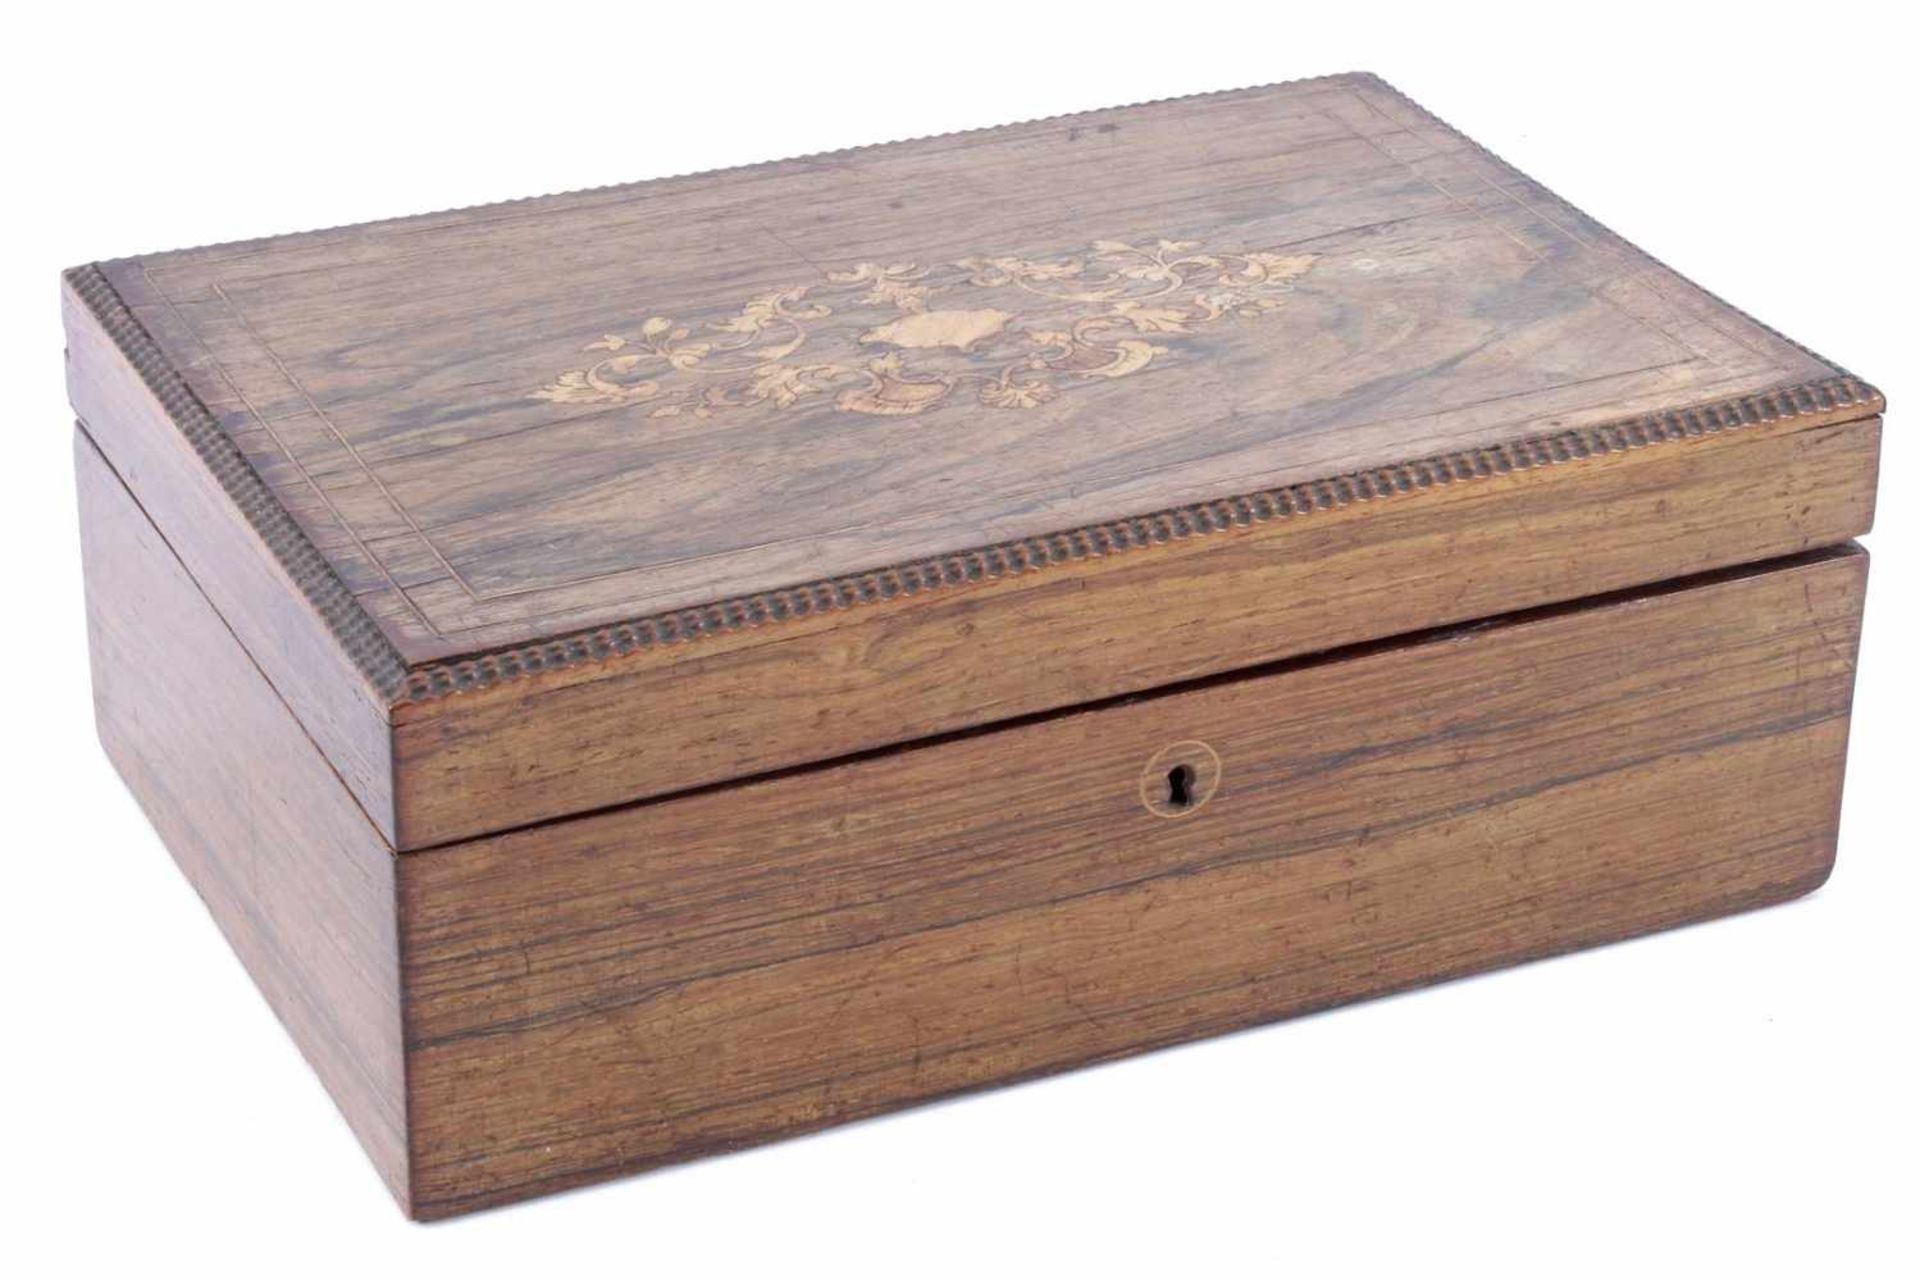 Rosewood veneer with intarsia pattern in lid of document box 11 cm high, 29.5x20 cm